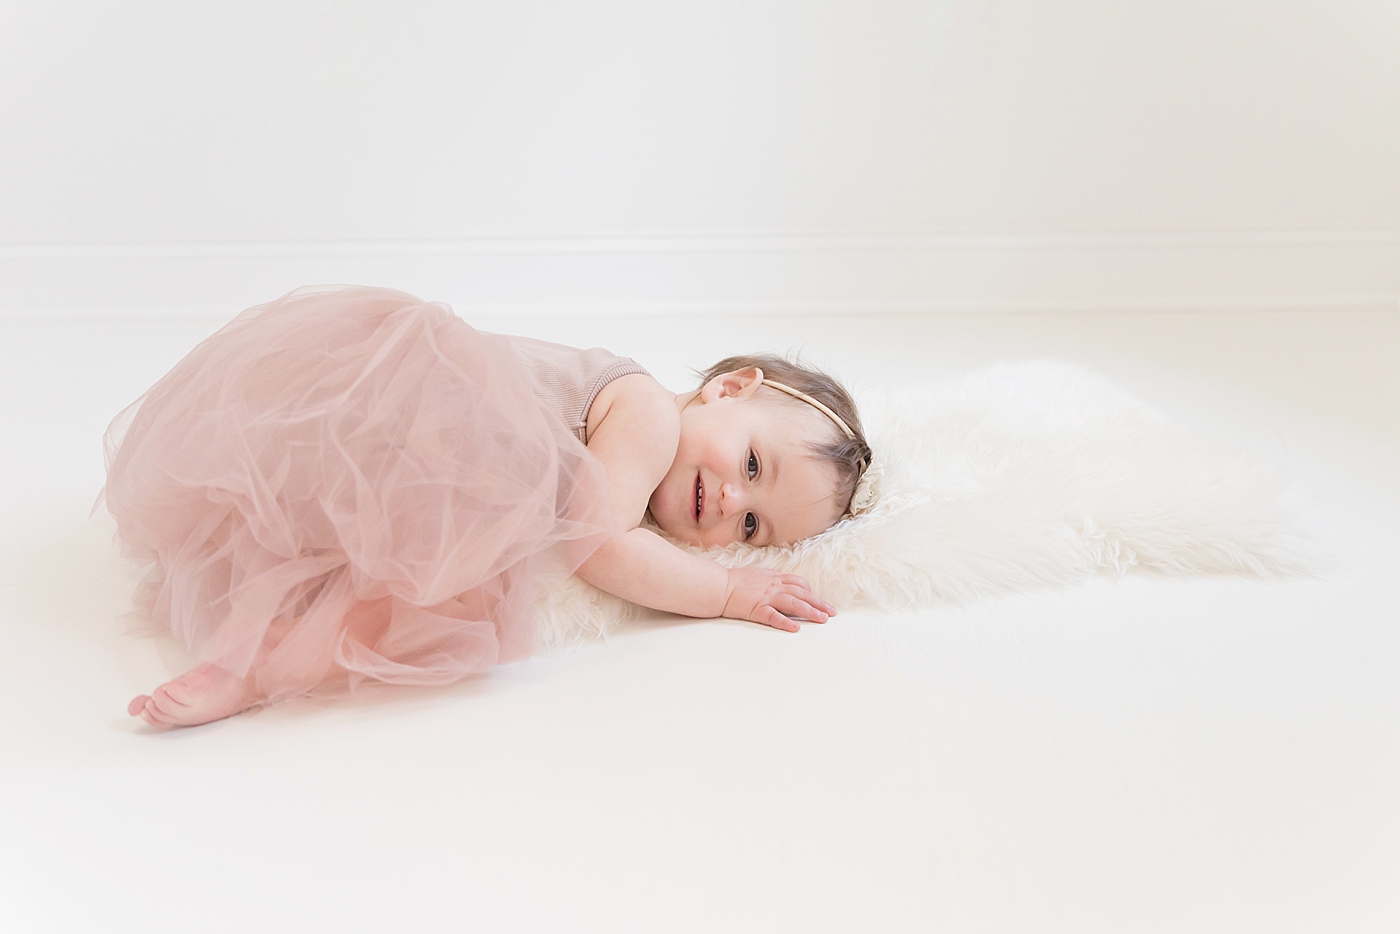 Baby girl in pink snuggling with soft white blanket looking at the camera | Photo by Anna Wisjo Photography